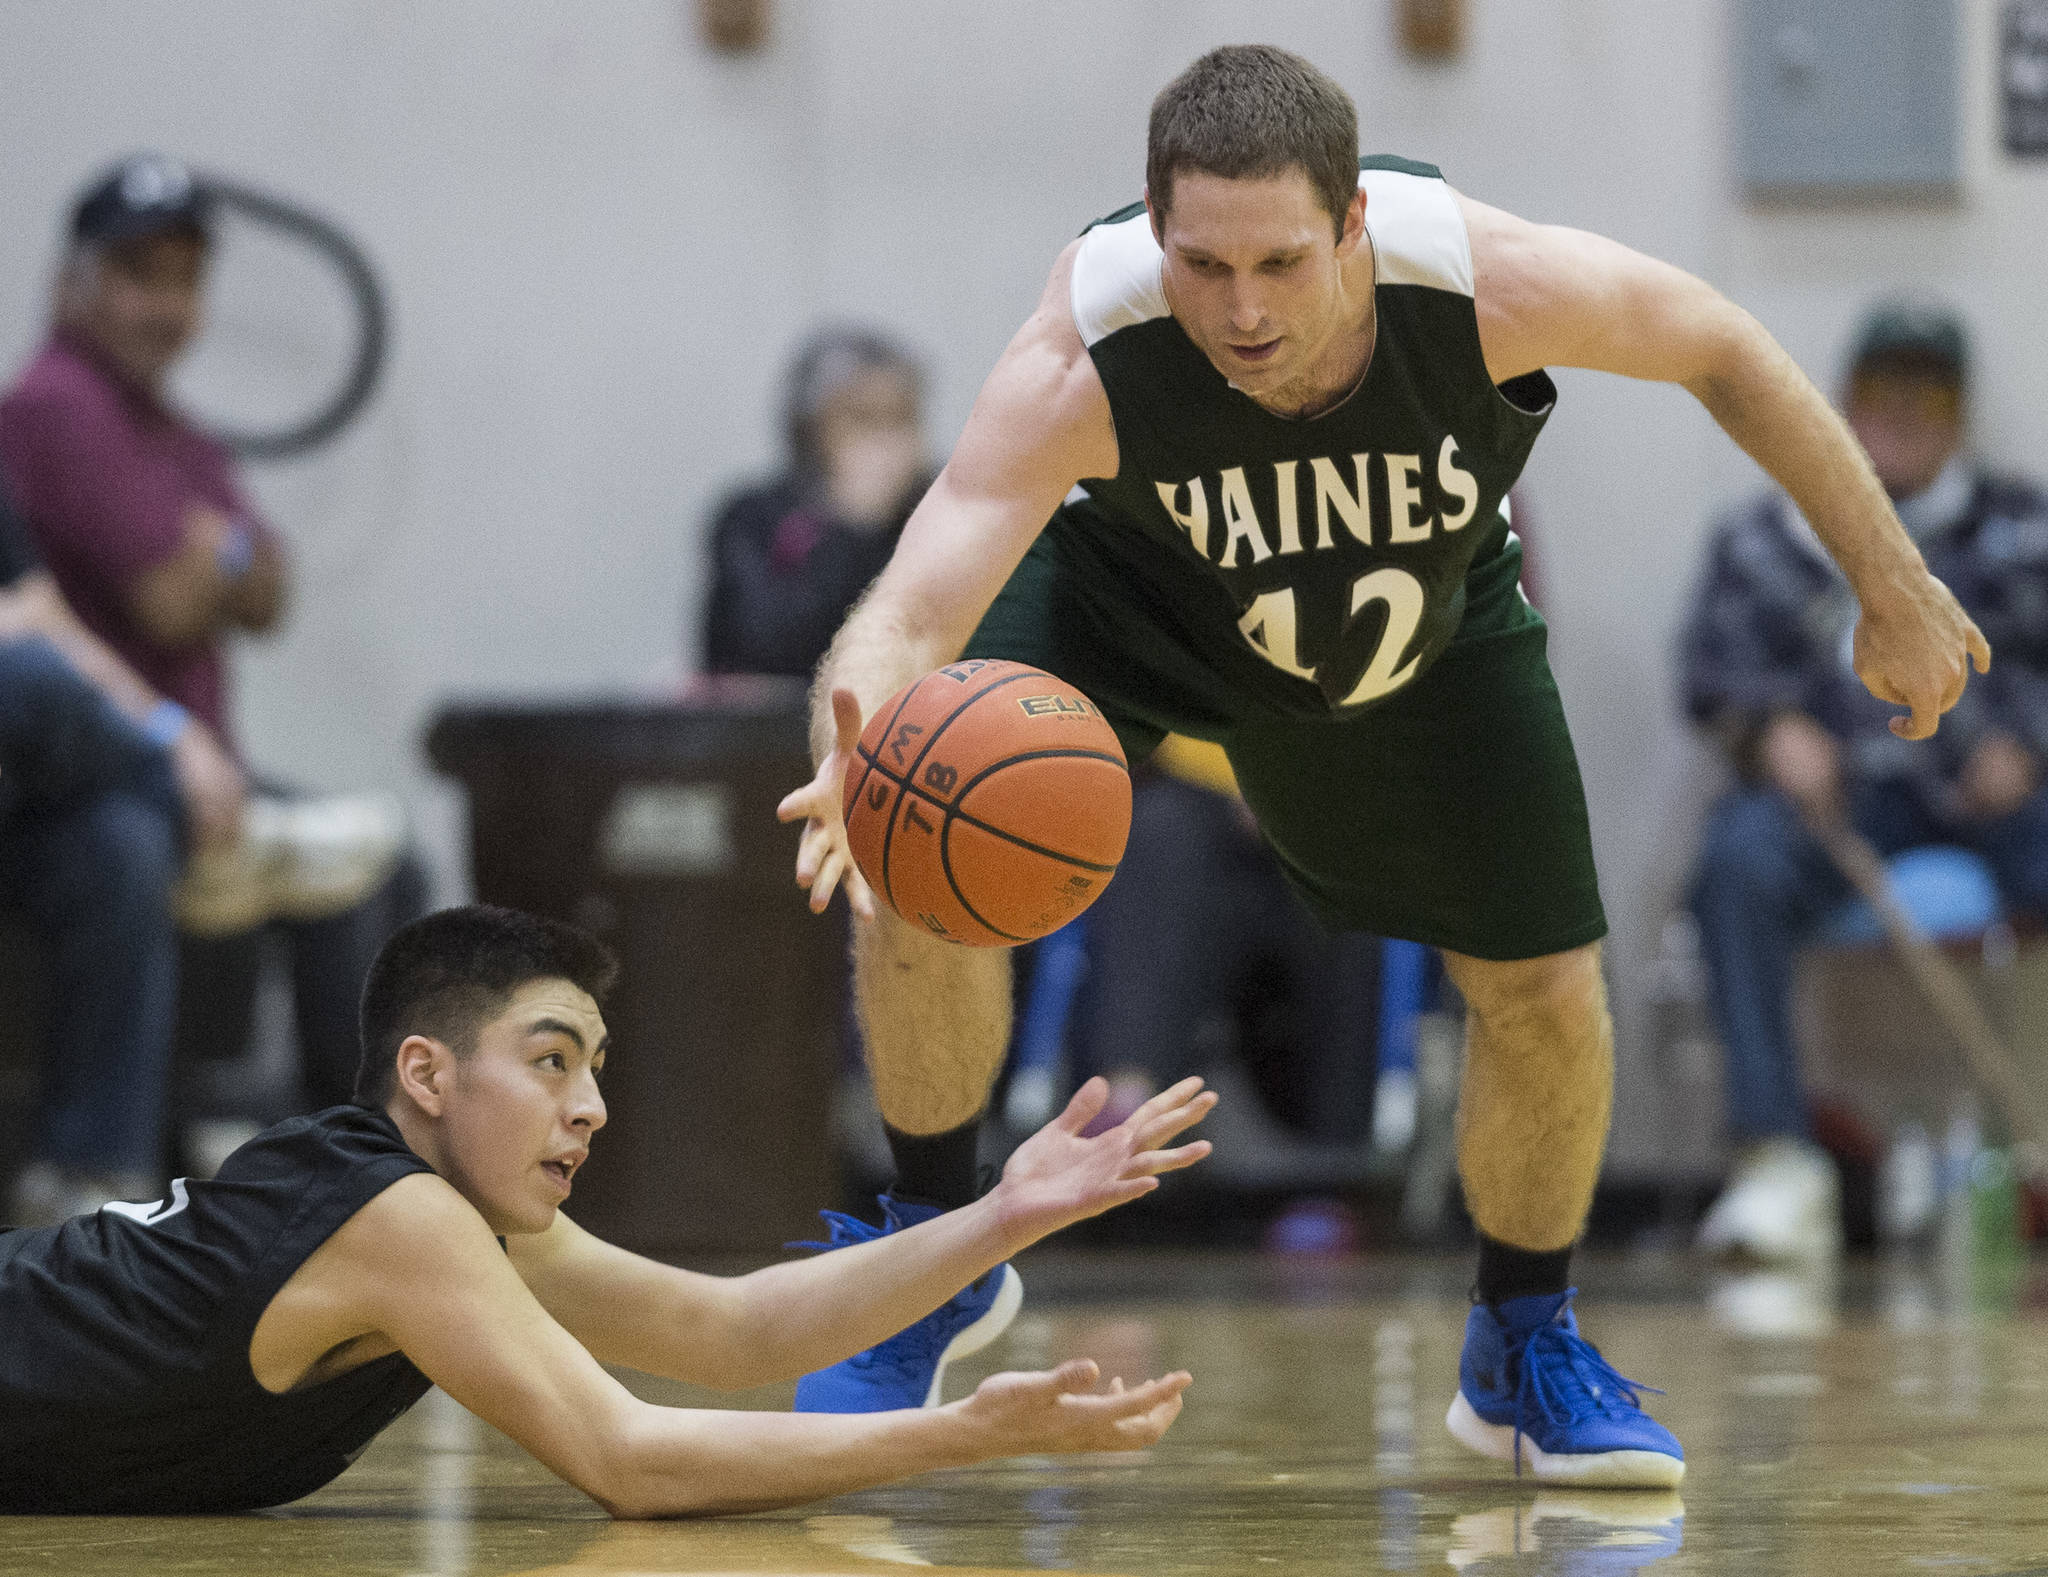 Haines’ Kyle Fossman, right, and Hydaburg’s Roger Trout chase a loose ball during their B bracket game at the Juneau Lions Club 73rd Annual Gold Medal Basketball Tournament at Juneau-Douglas High School: Yadaa.at Kalé on Thursday, March 21, 2019. Haines won 78-52. (Michael Penn | Juneau Empire)